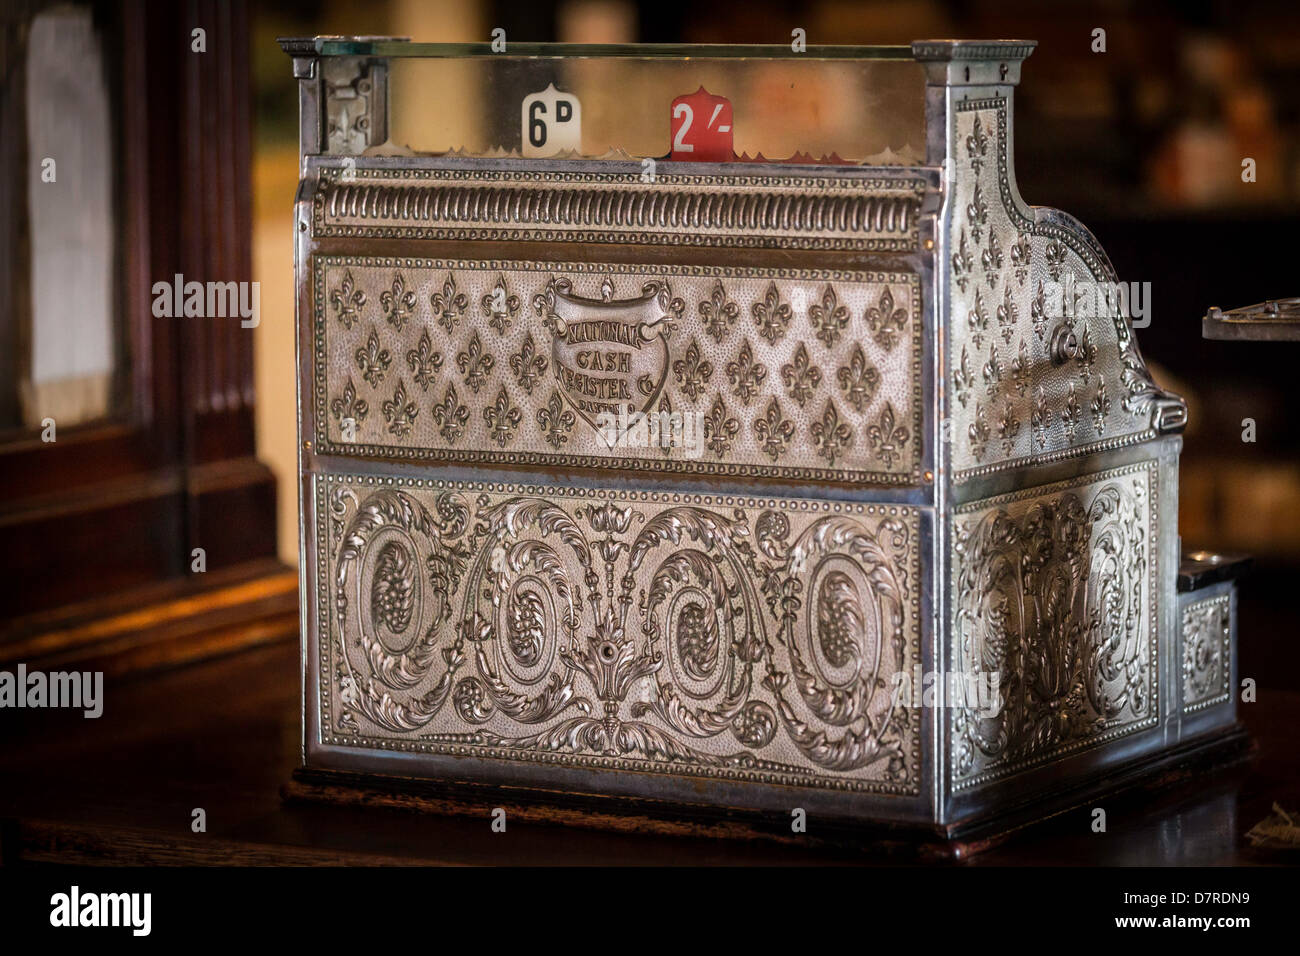 A Vintage Cash Register Used In The early 1900's Stock Photo